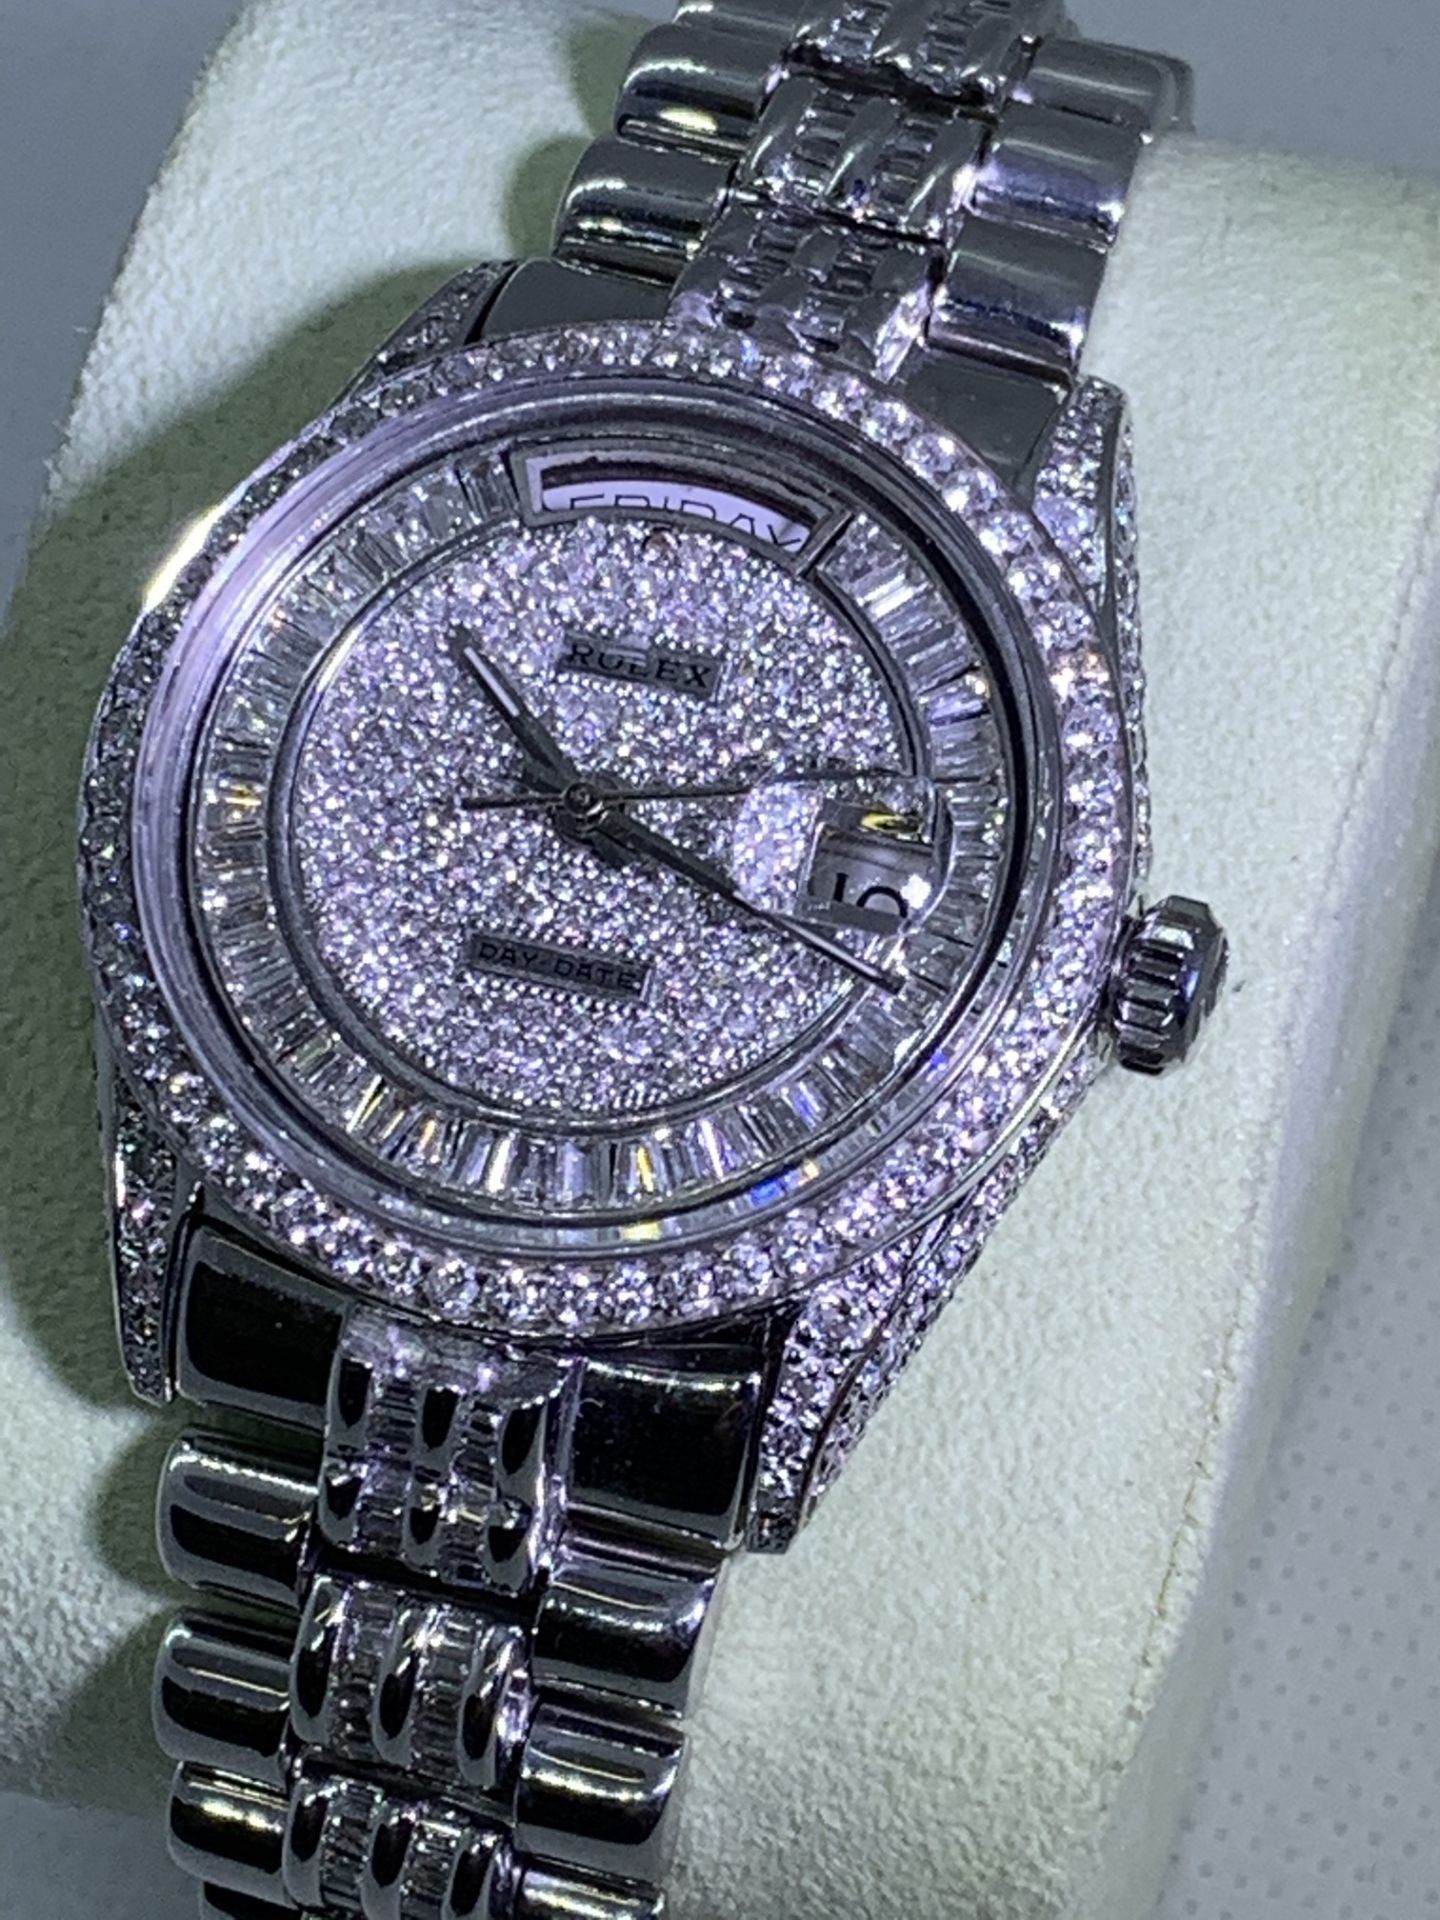 Diamond Encrusted Mens 36mm Day-Date, Solid White Gold - Diamond/ “Super President” Marked ROLEX - Image 14 of 18